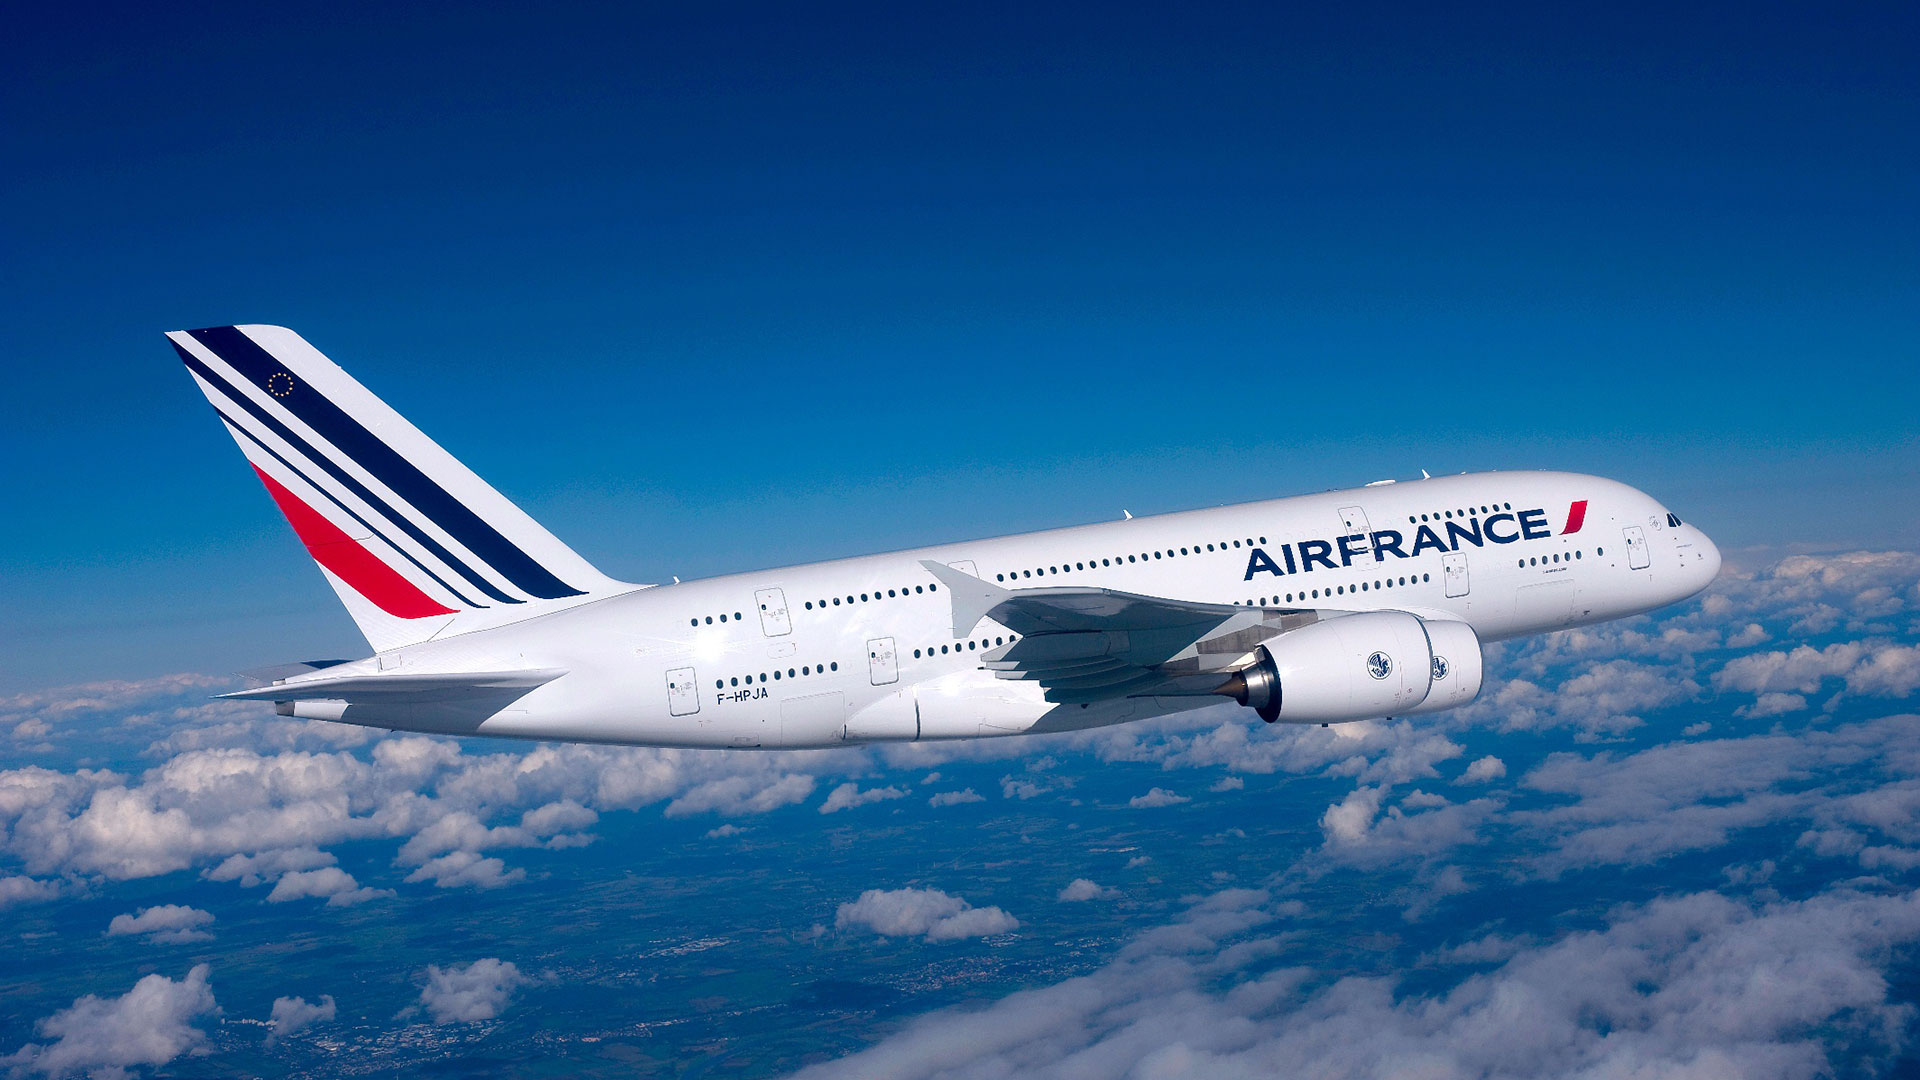 air-france-s-la-premiere-two-vip-services-with-private-jet-connections